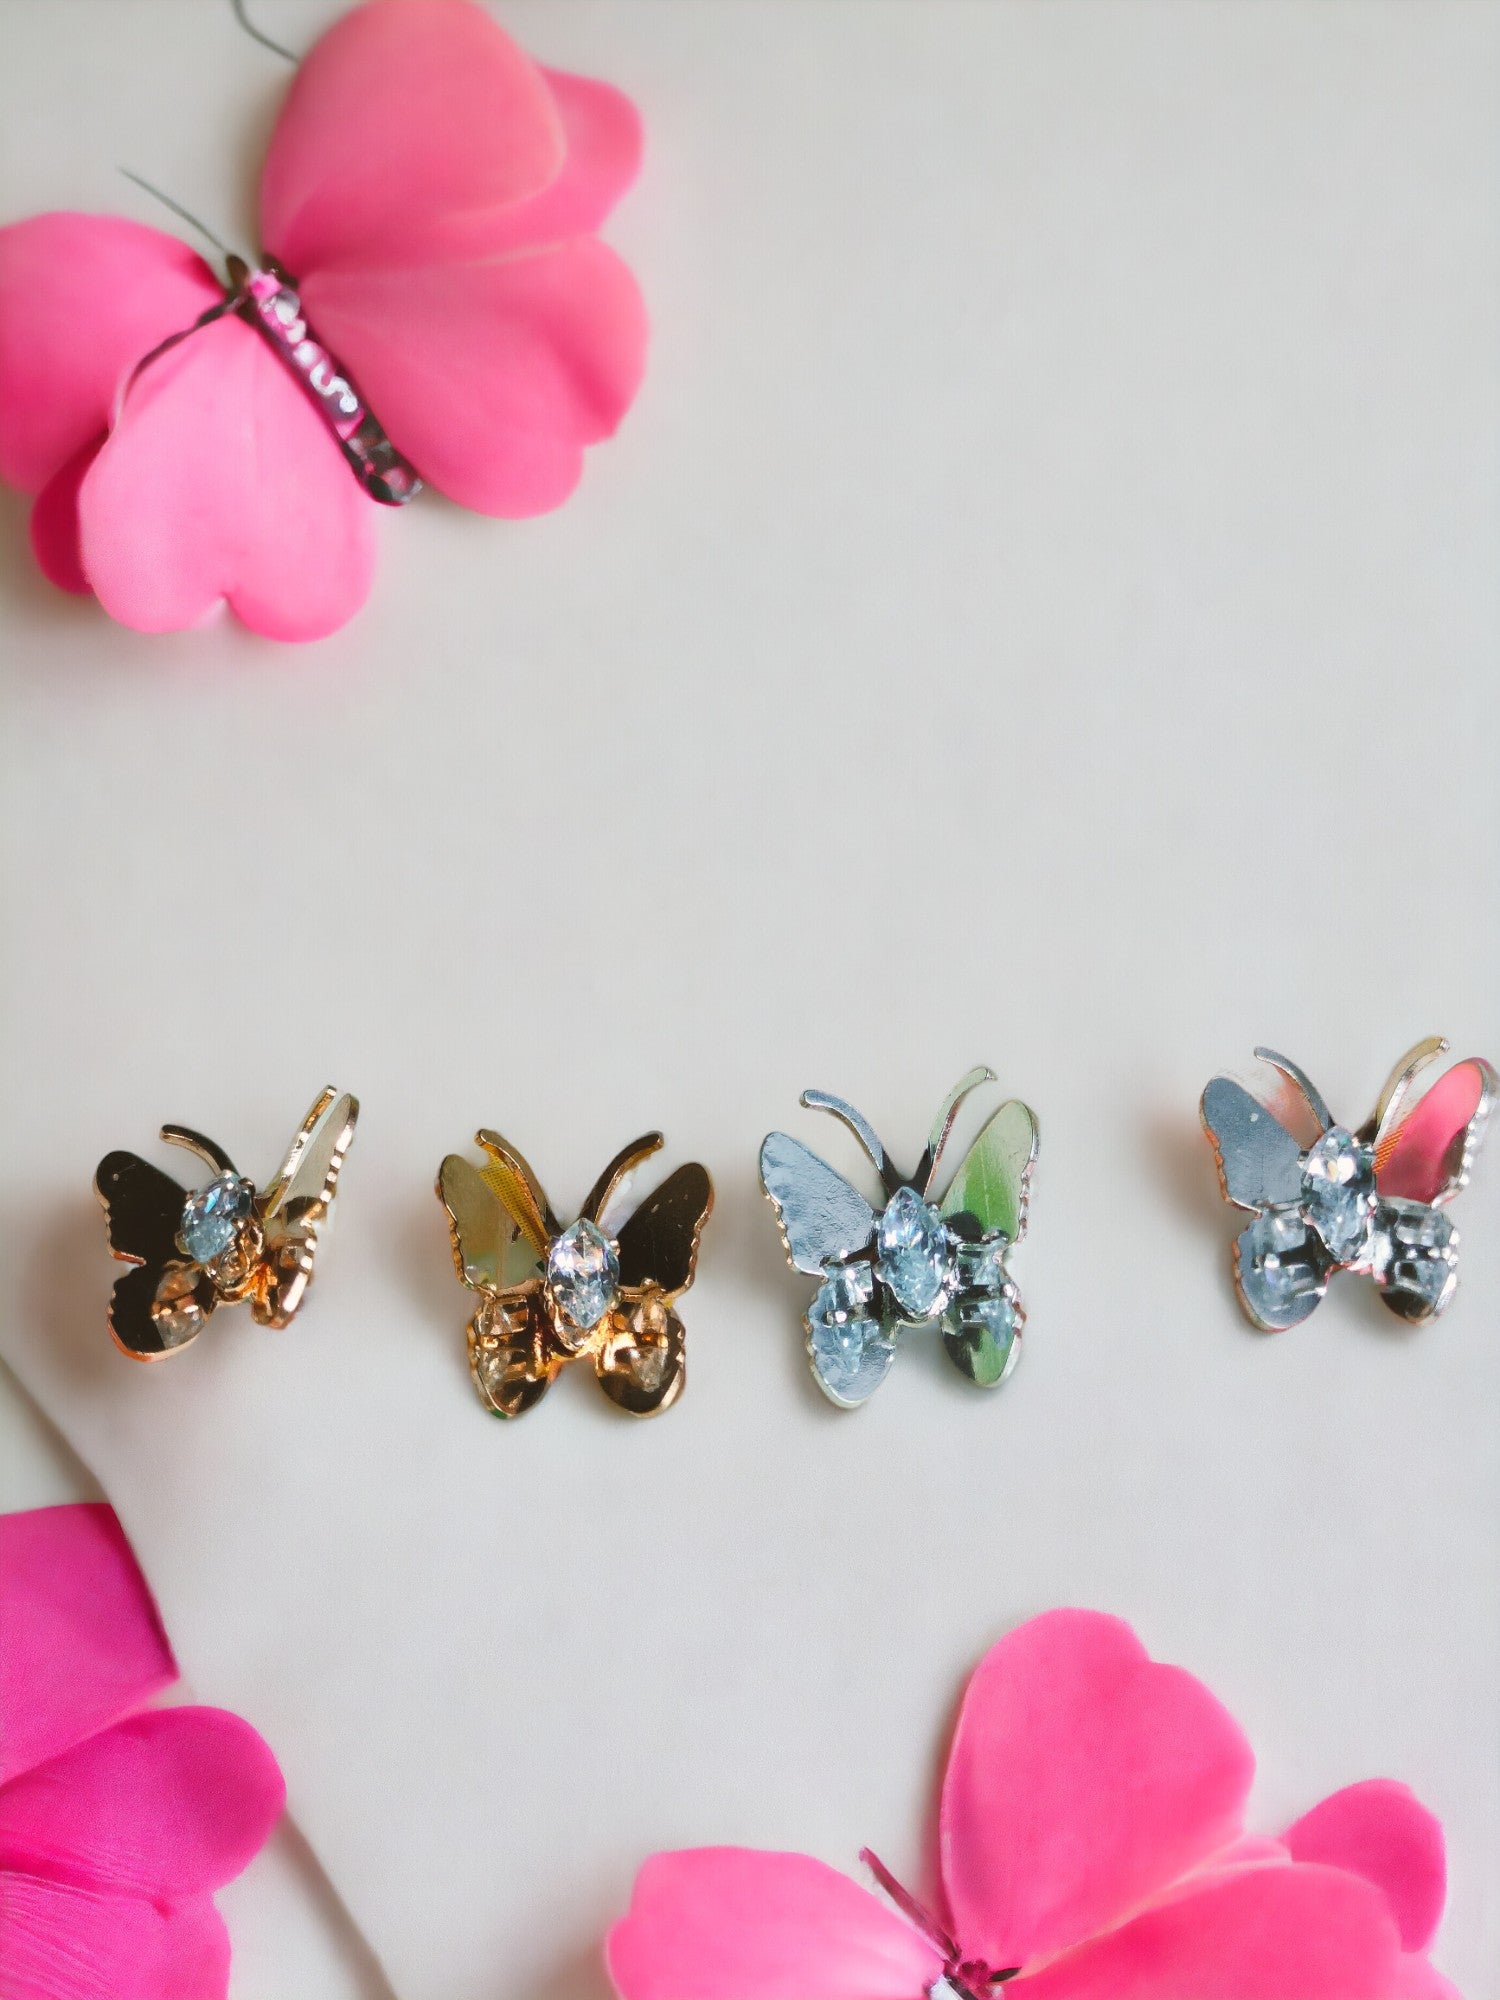 Enchanted Garden Cute Girly Studs - Multi Designs and Combos Available